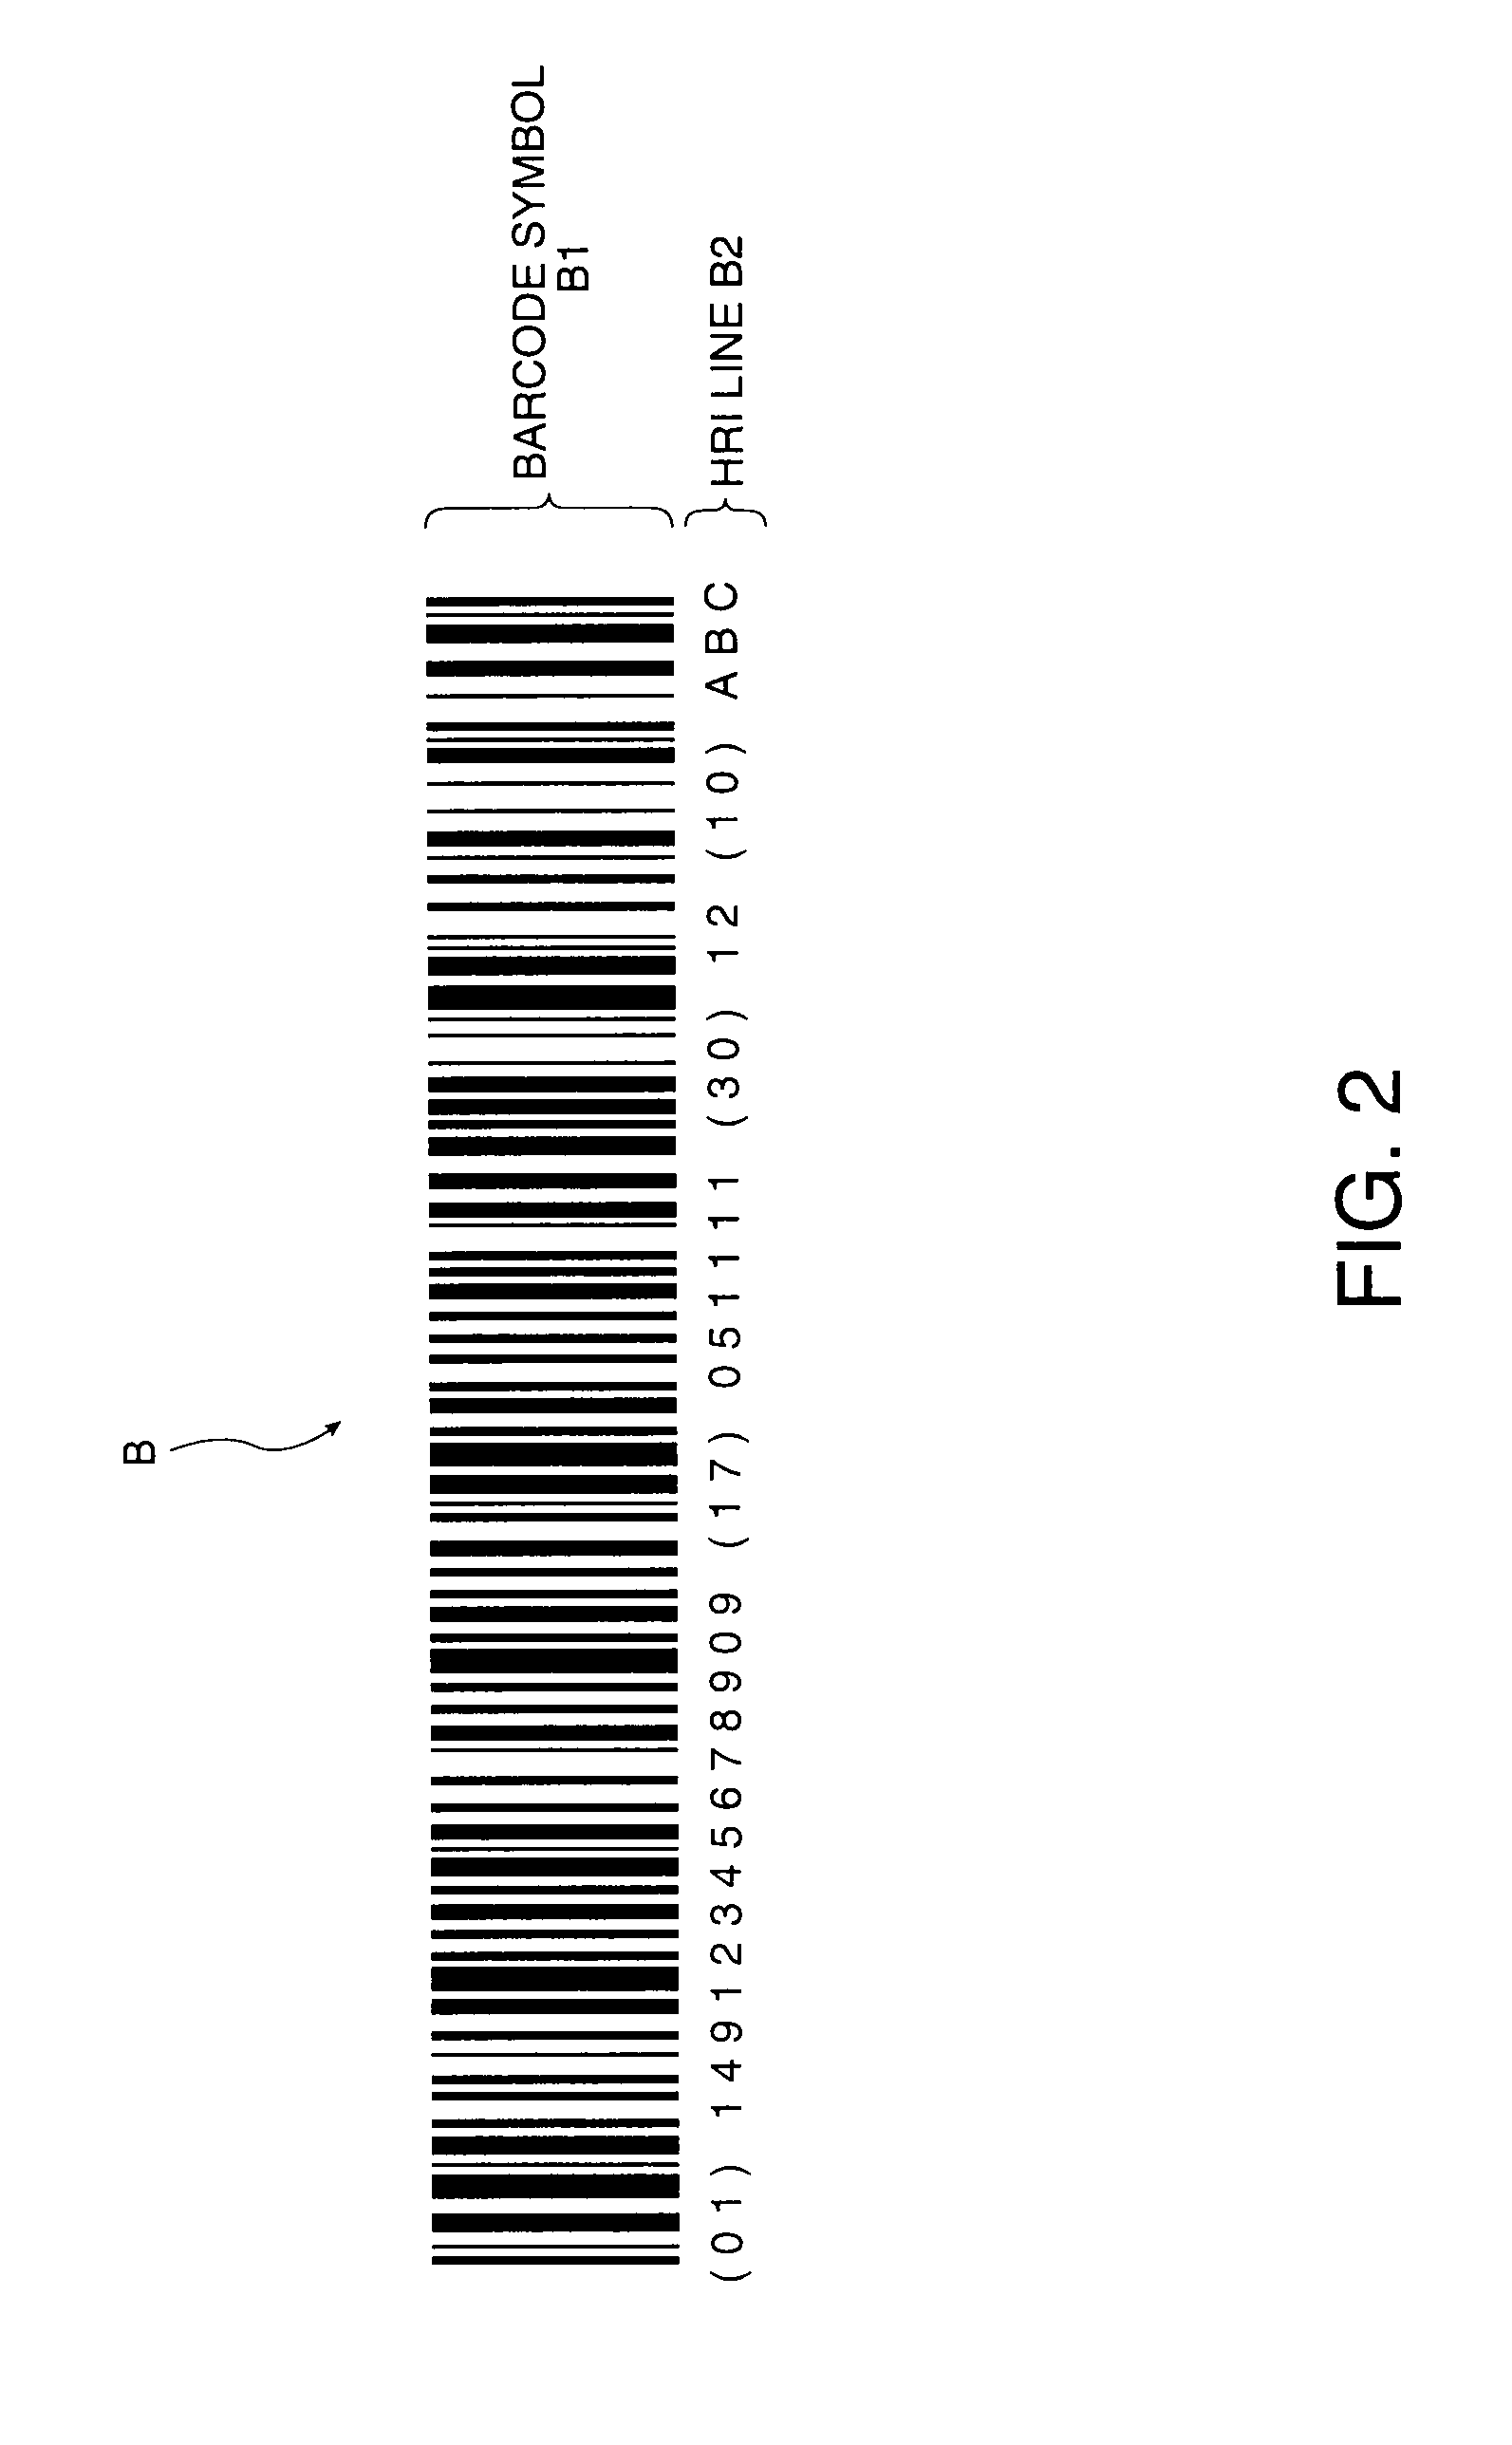 Method and Apparatus for Generating a Barcode with a Human Readable Interpretation, a Printing Apparatus, and a Program